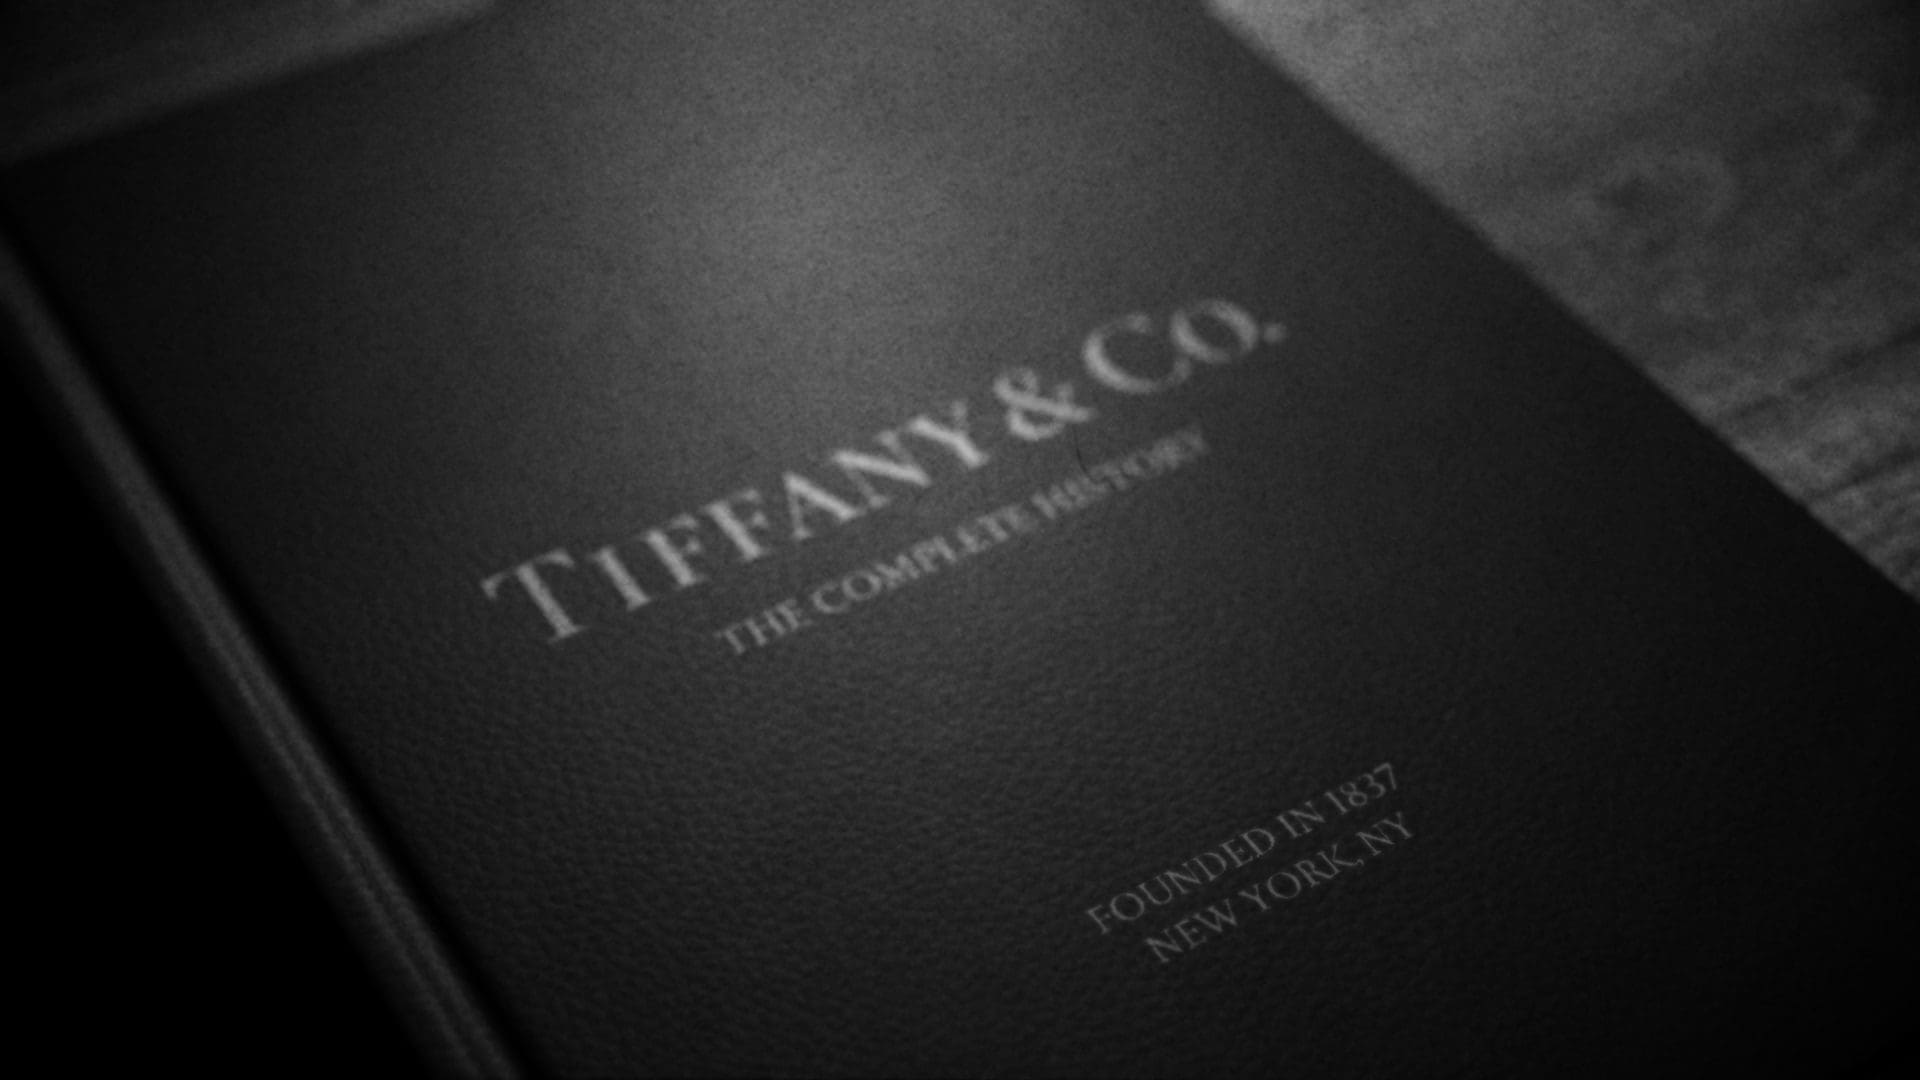 Close-up of a Tiffany & Co. book cover with the title 'The Complete History,' highlighting the founding year 1837 and location New York, NY.